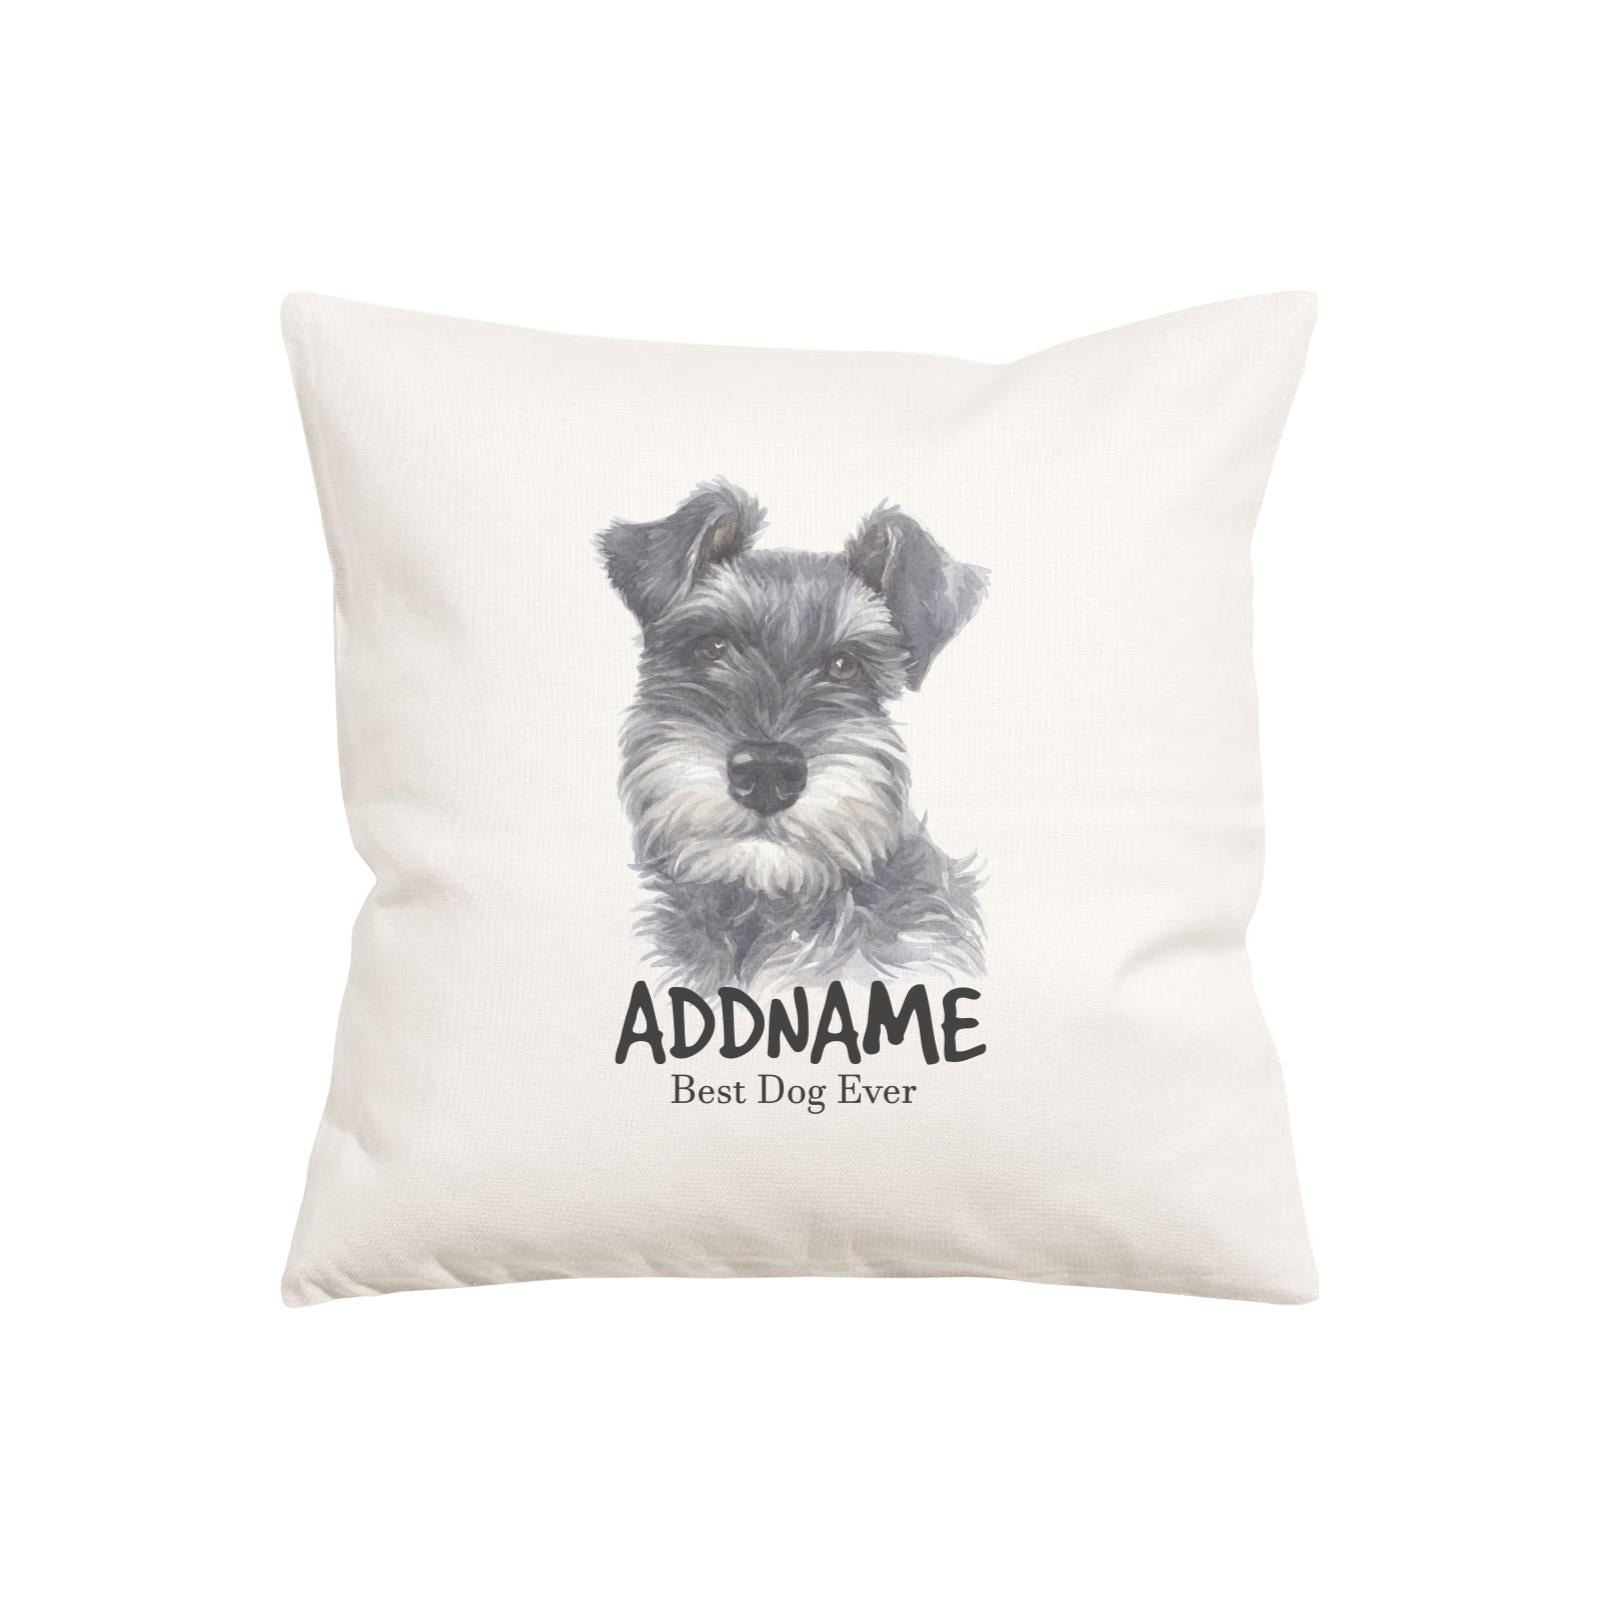 Watercolor Dog Series Schnauzer Front Black Best Dog Ever Addname Pillow Cushion